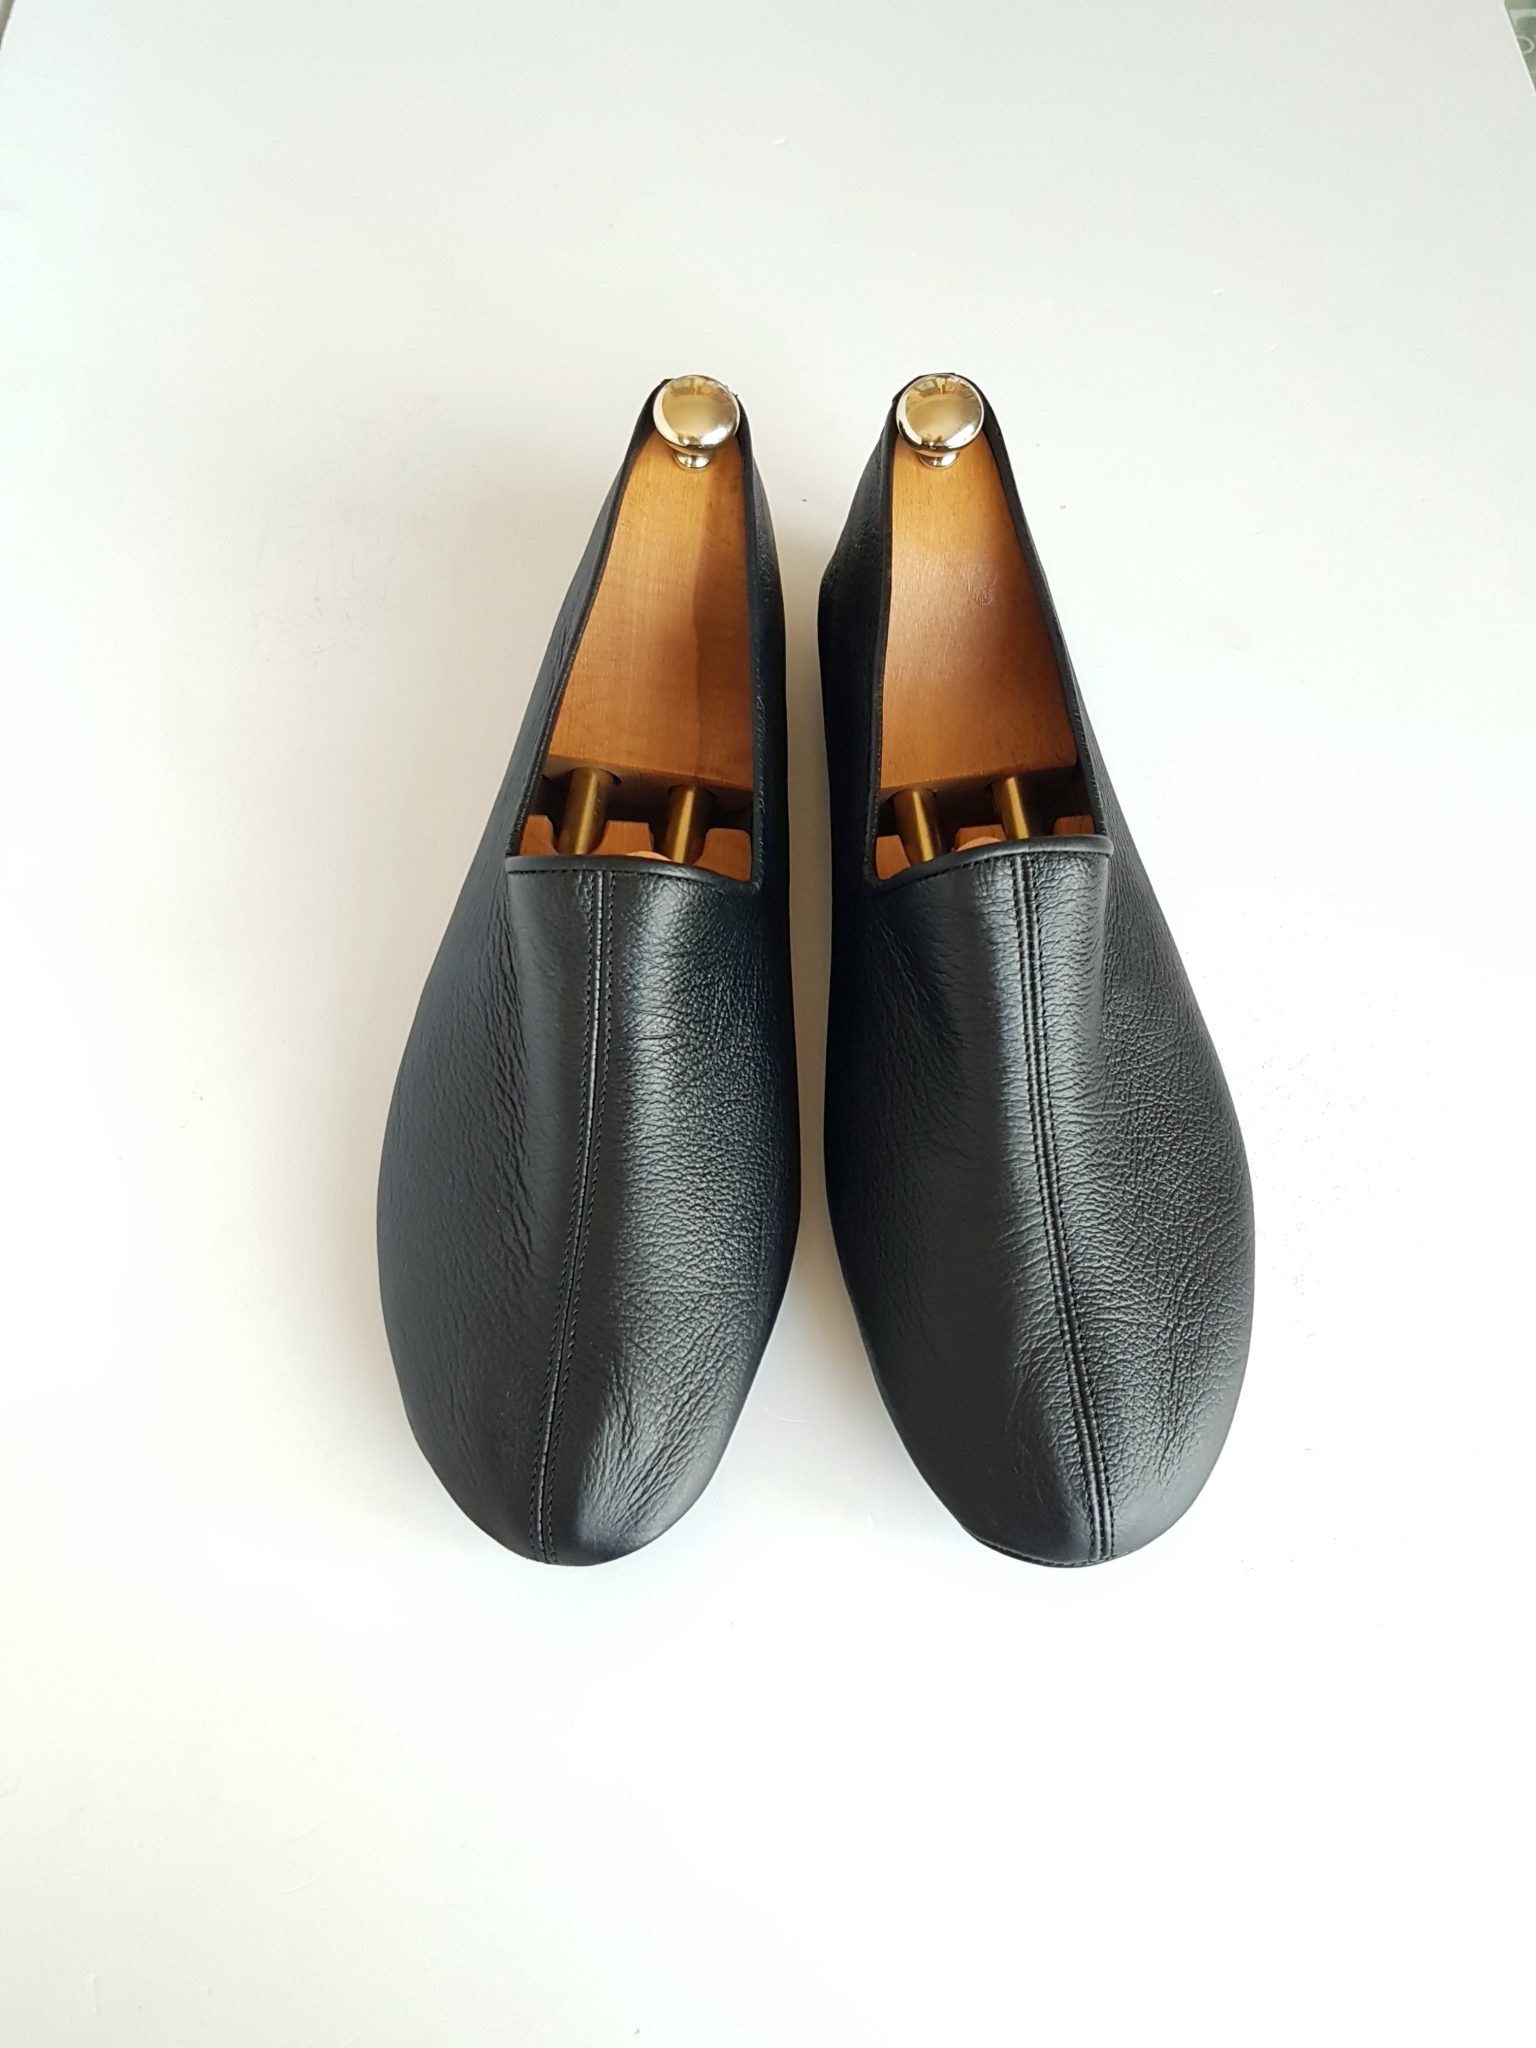 Black leather indoor slipper,dervish shoes – Handcrafted Shoes and Bags